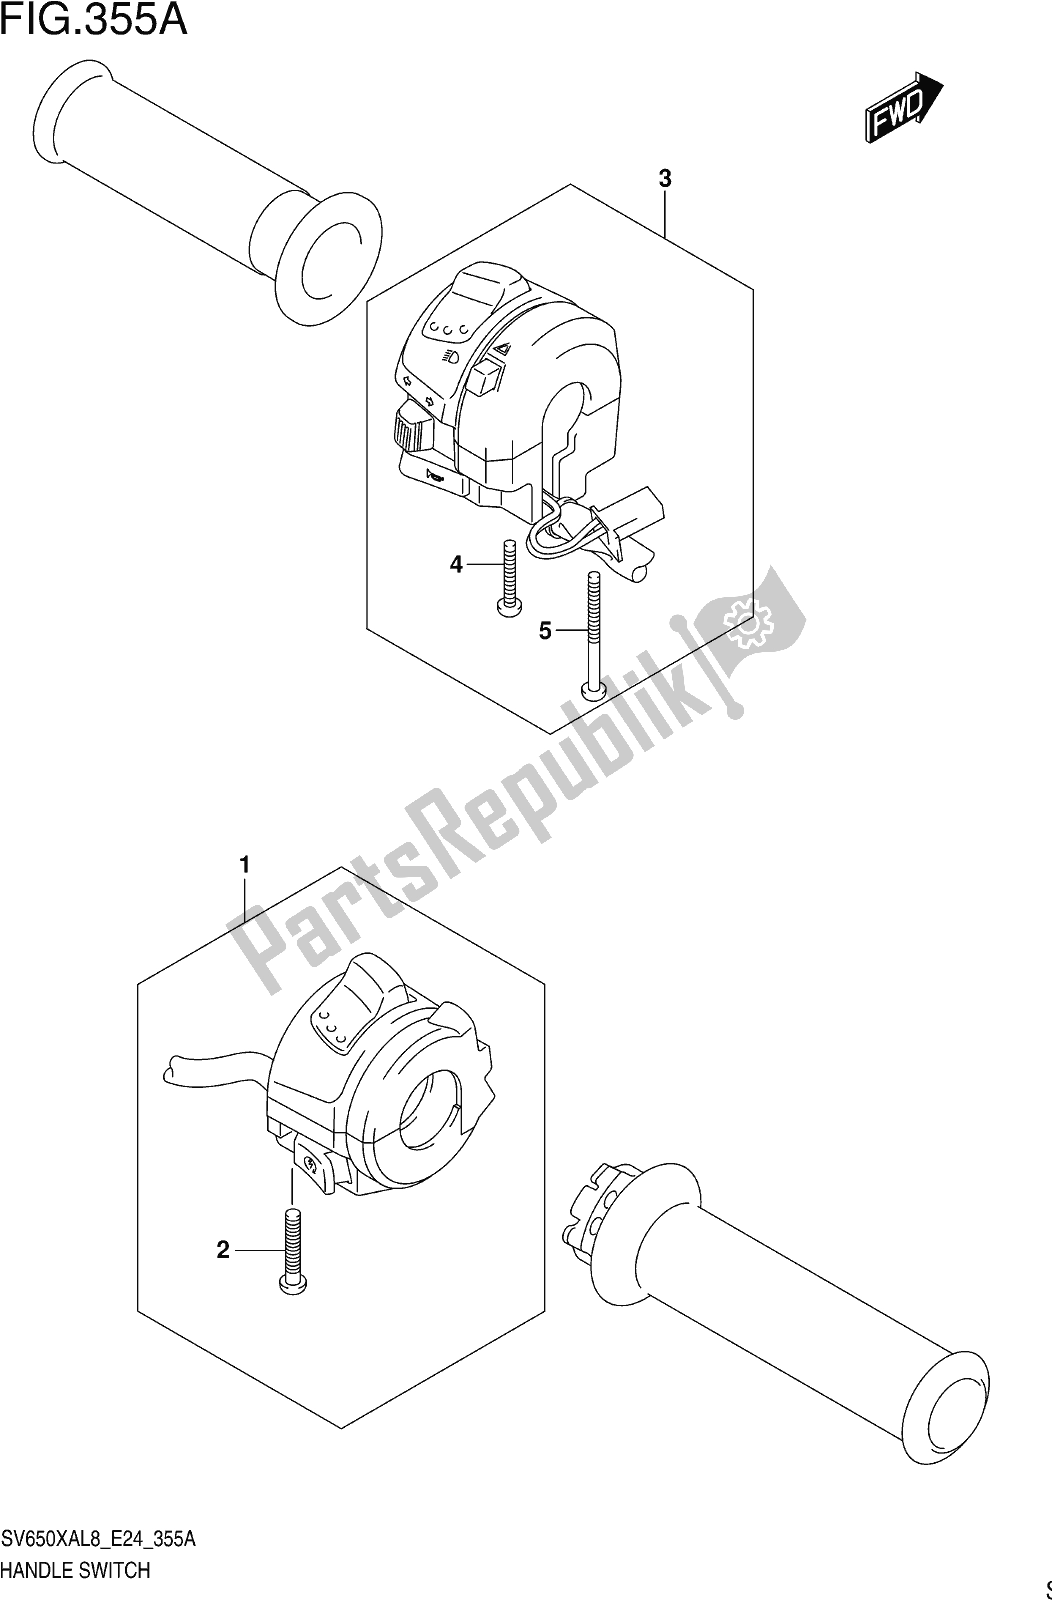 All parts for the Fig. 355a Handle Switch of the Suzuki SV 650 XA 2018